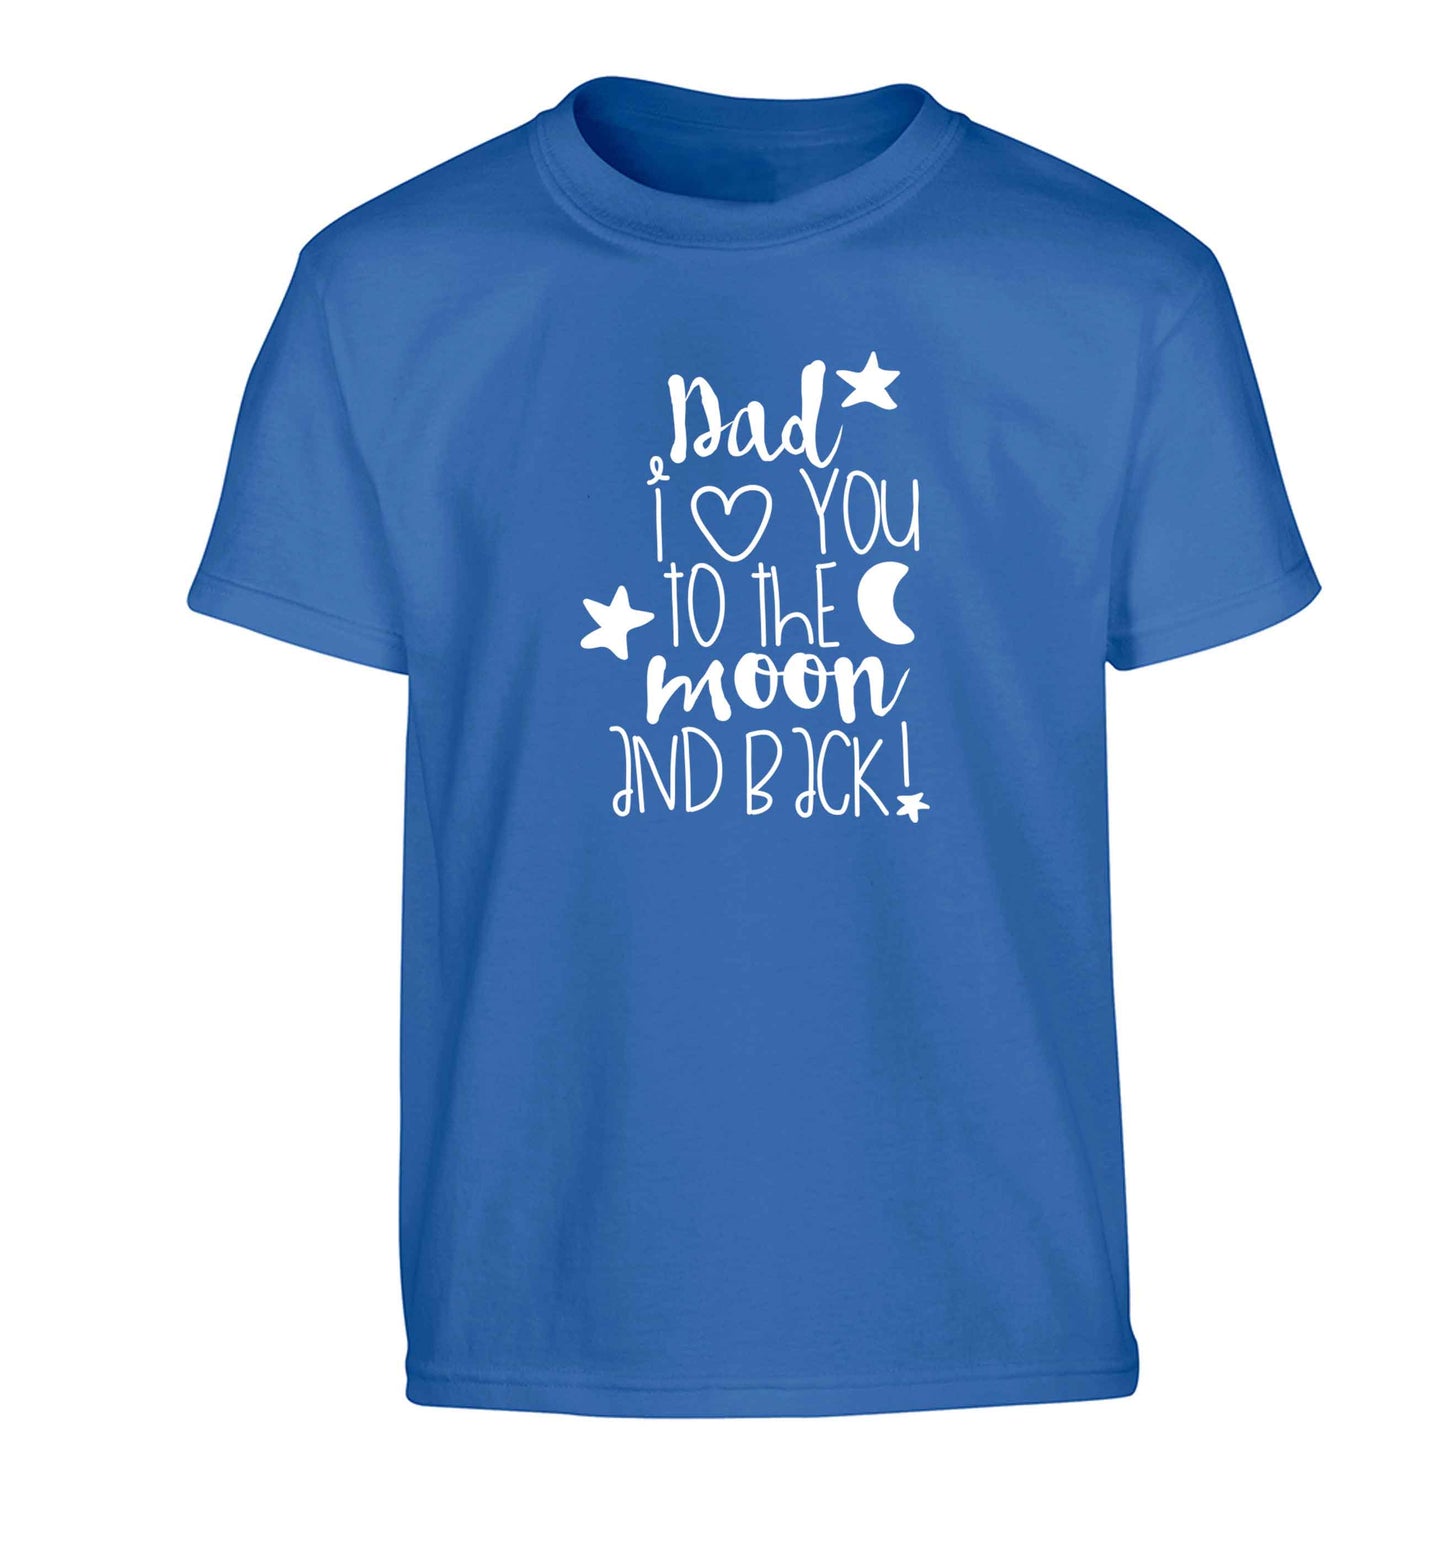 Dad I love you to the moon and back Children's blue Tshirt 12-13 Years